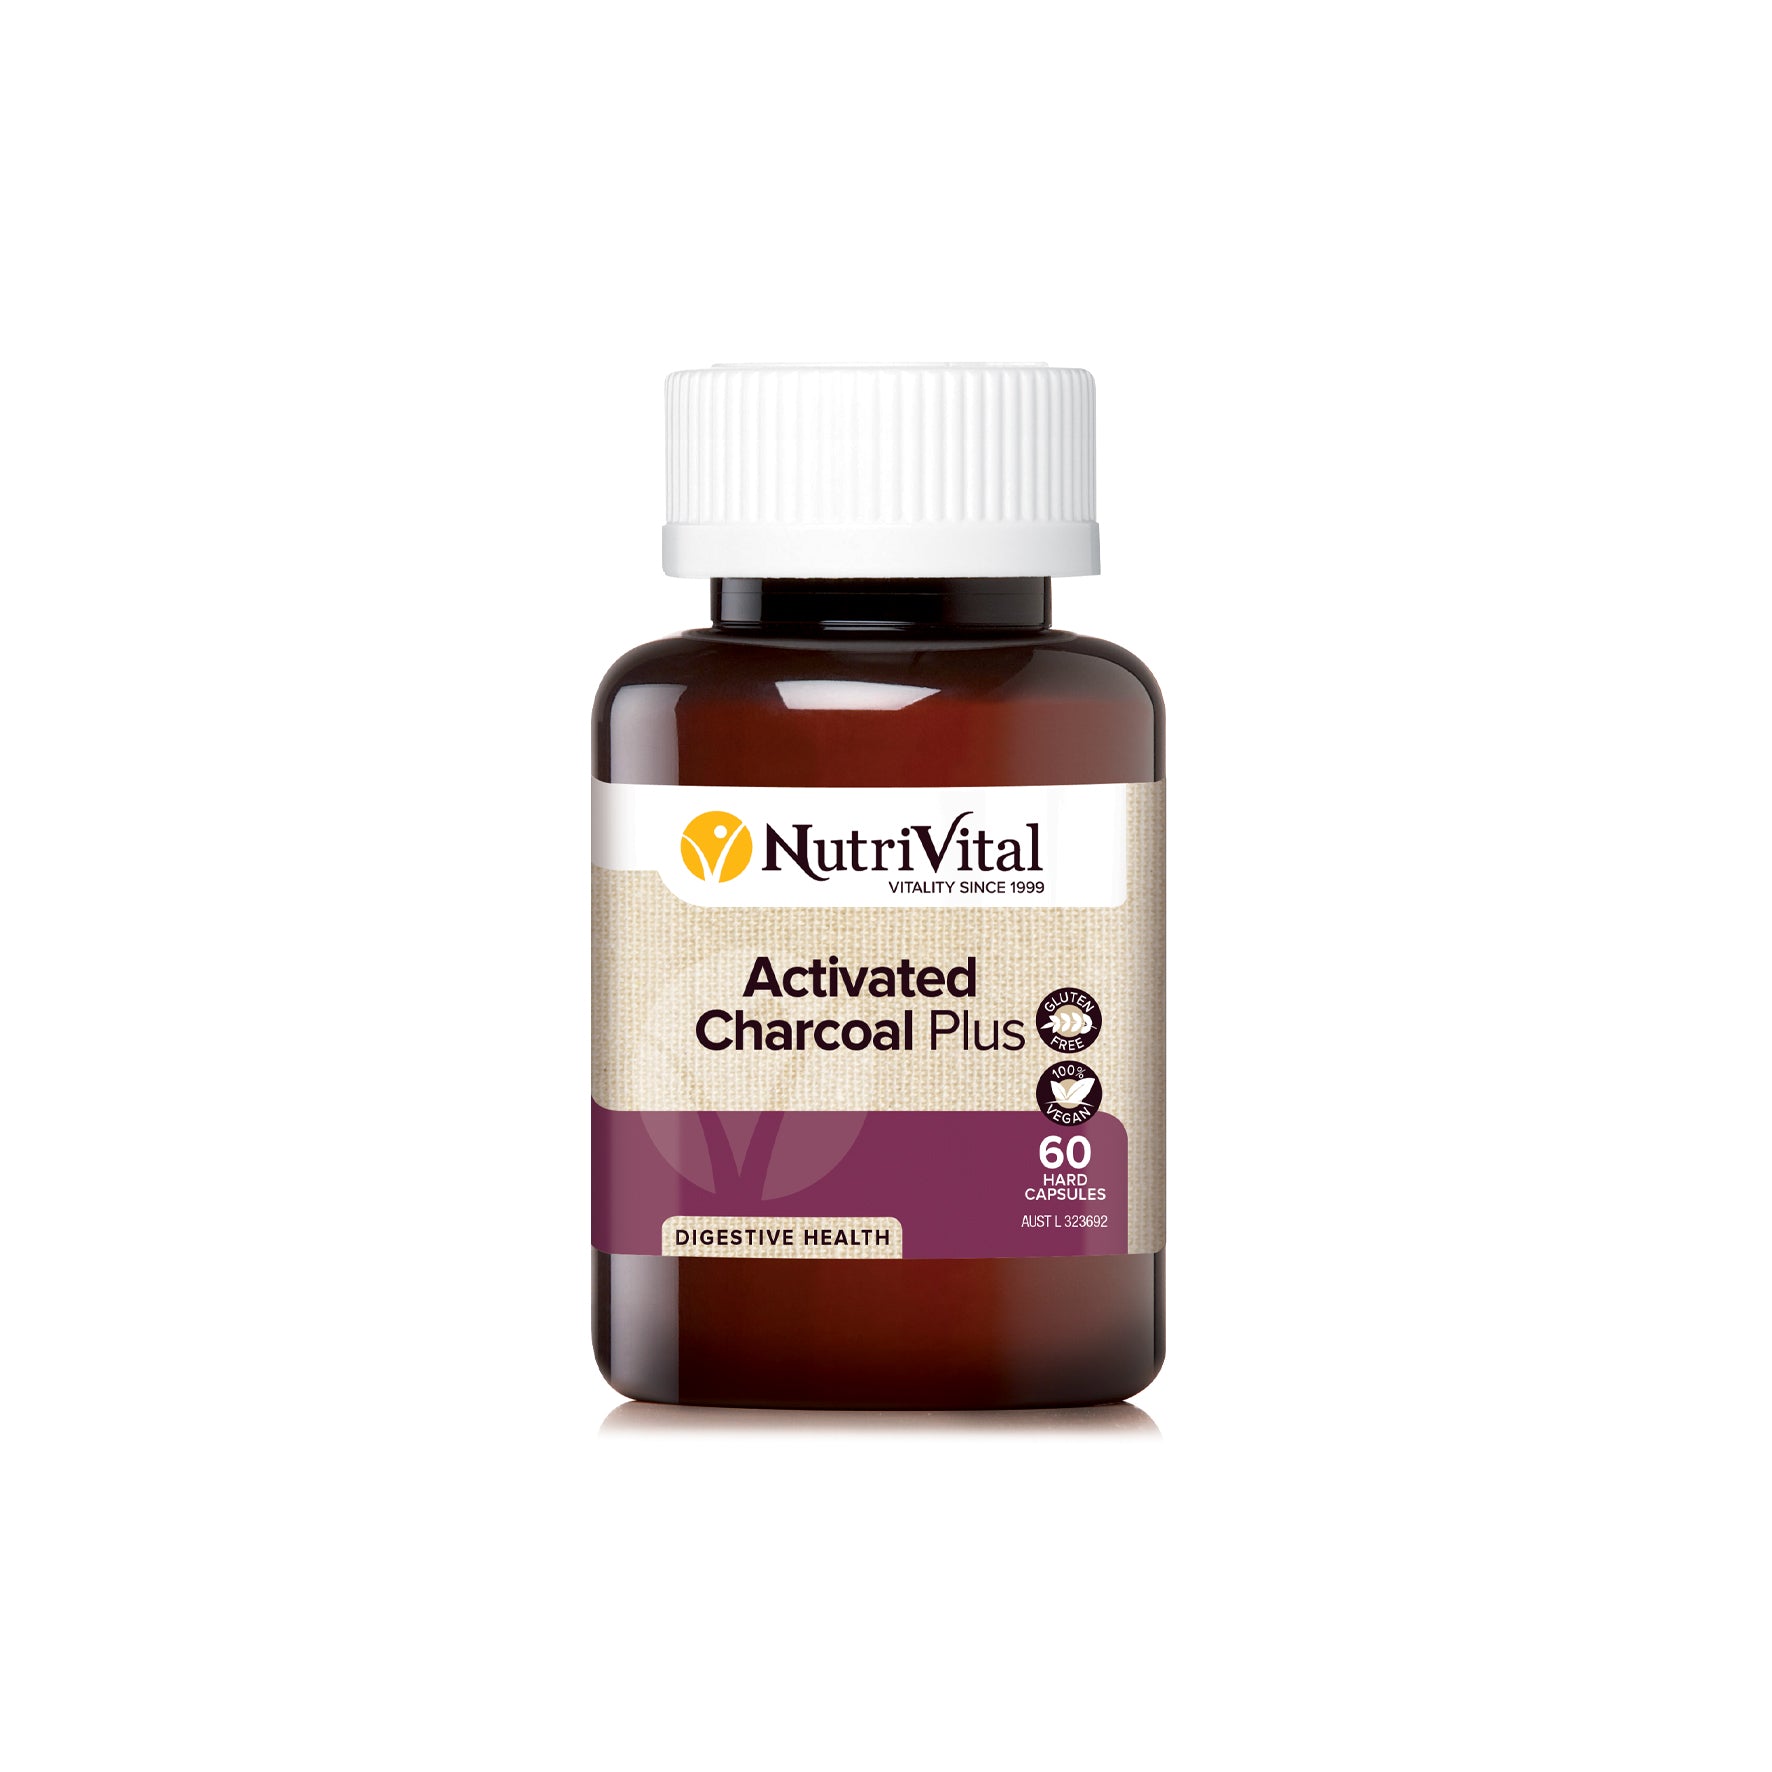 NUTRIVITAL ACTIVATED CHARCOAL PLUS